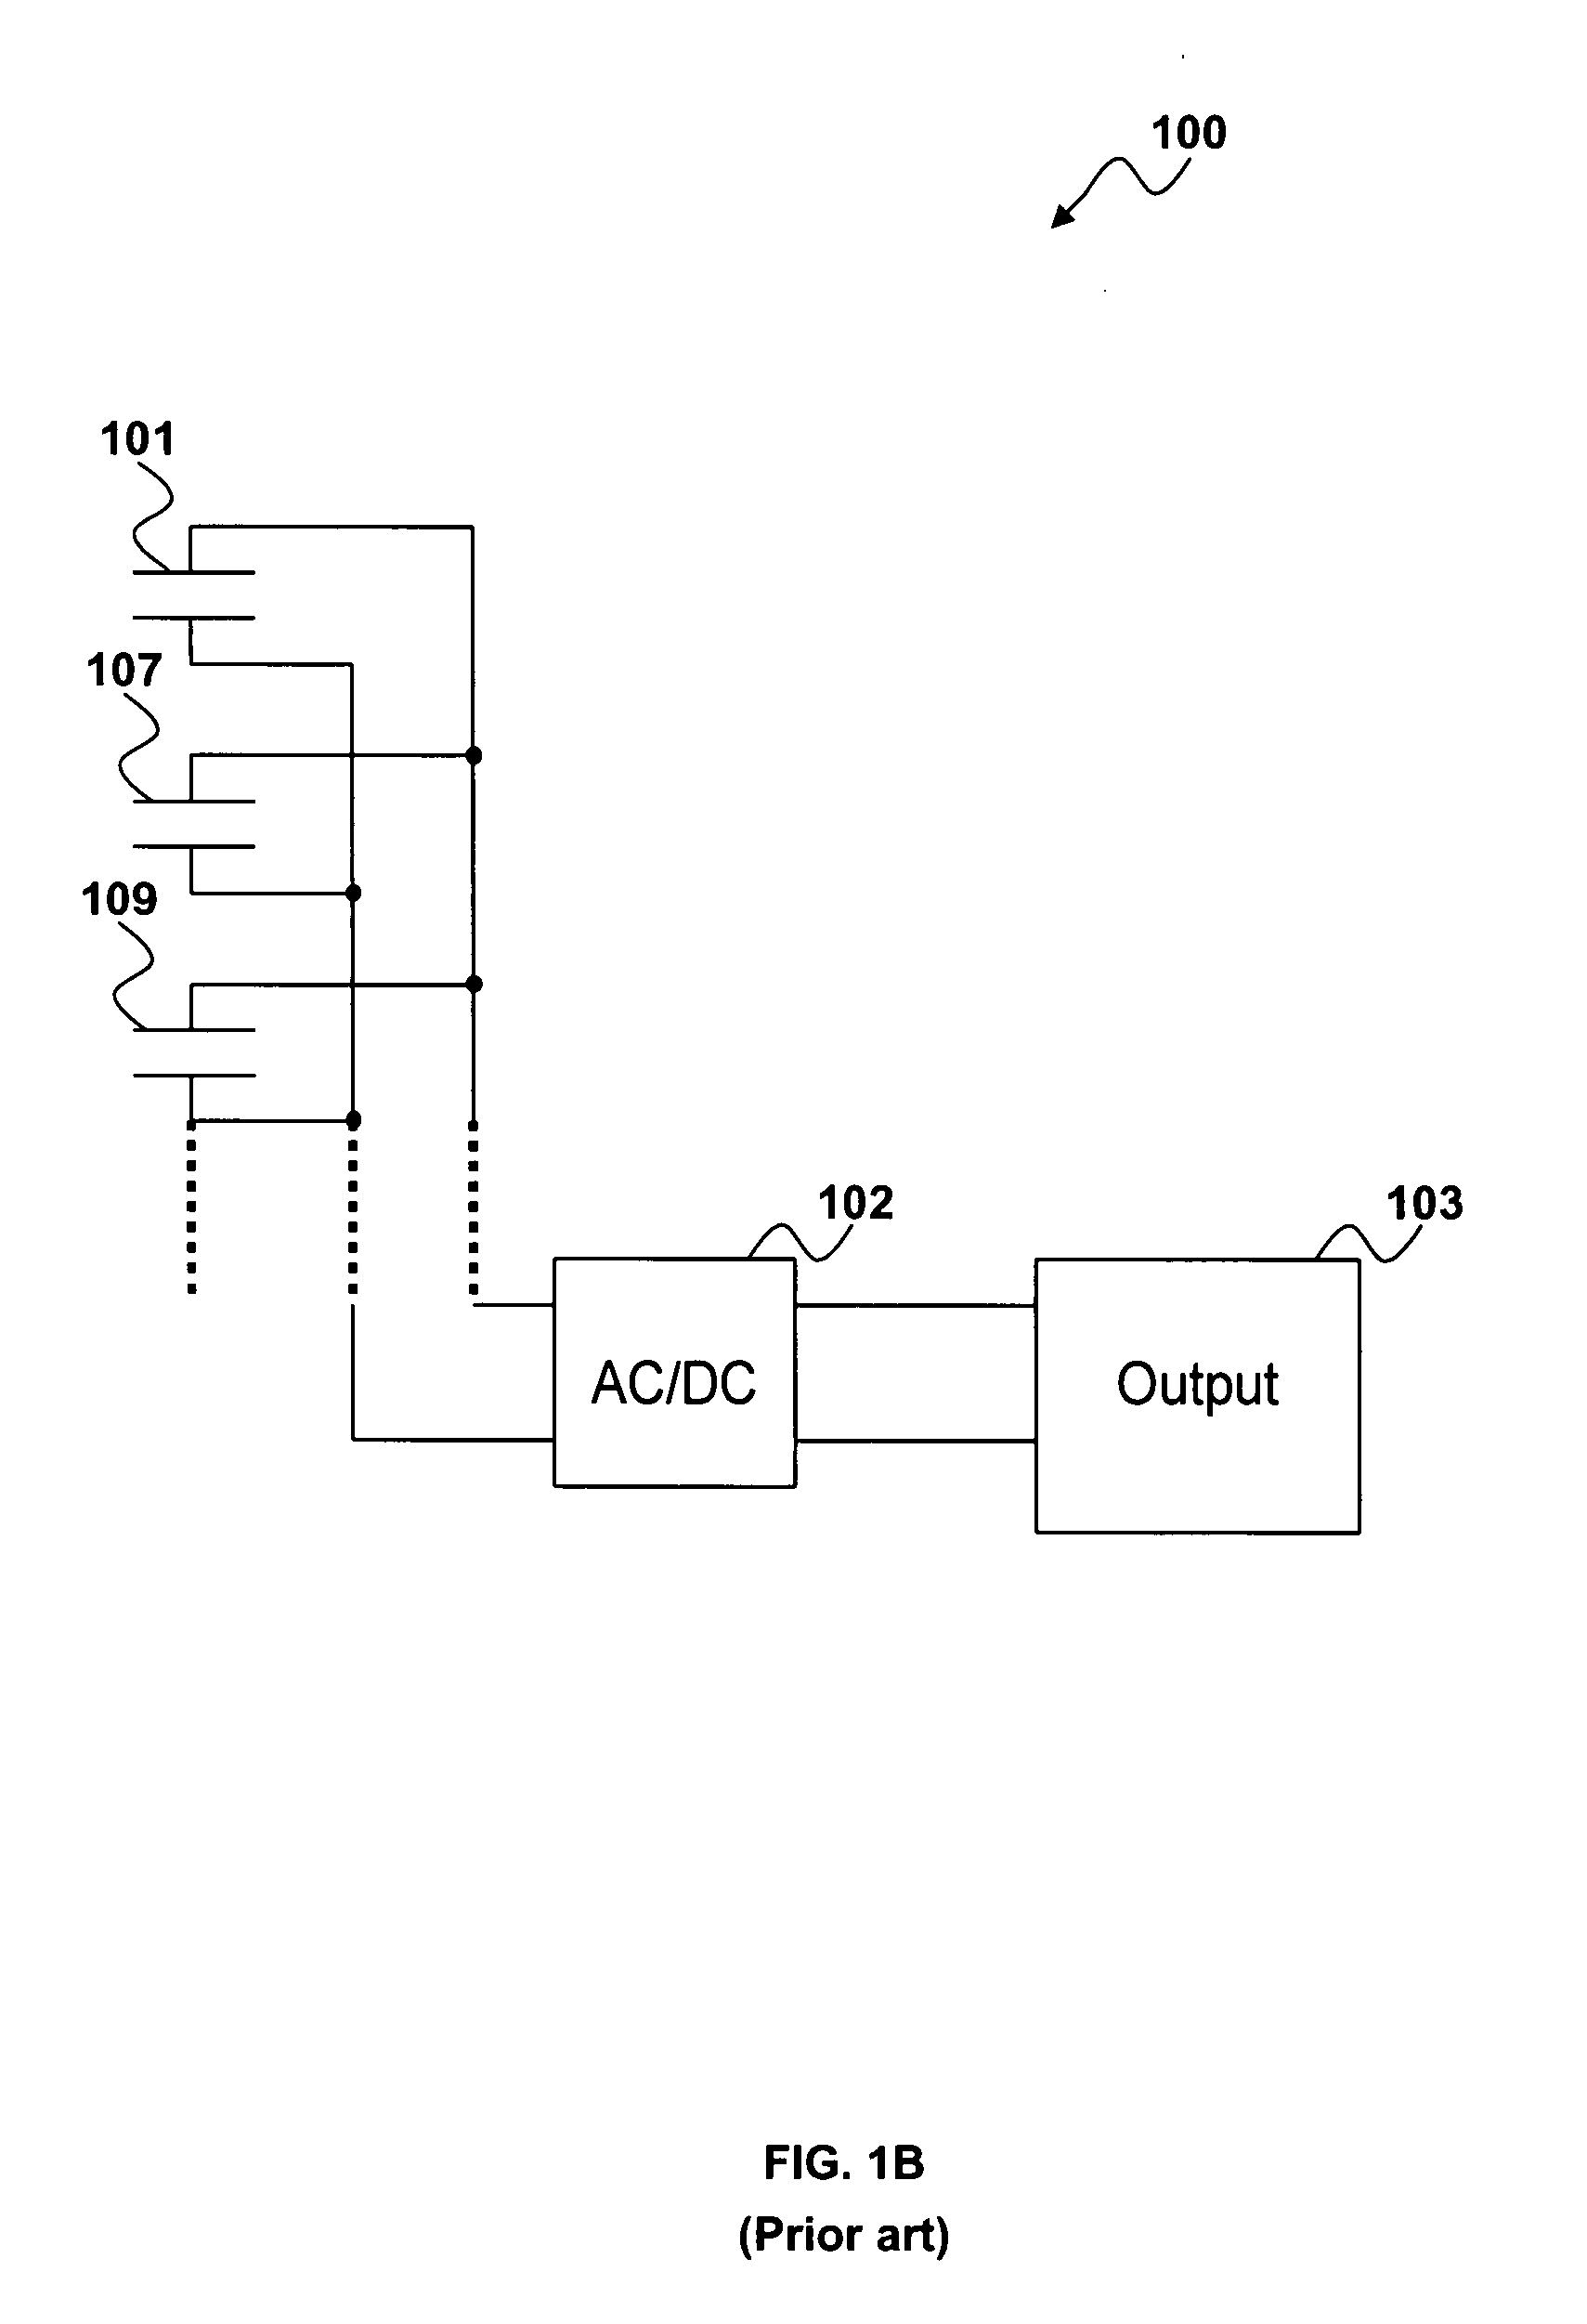 Electrical connection of energy harvesting devices